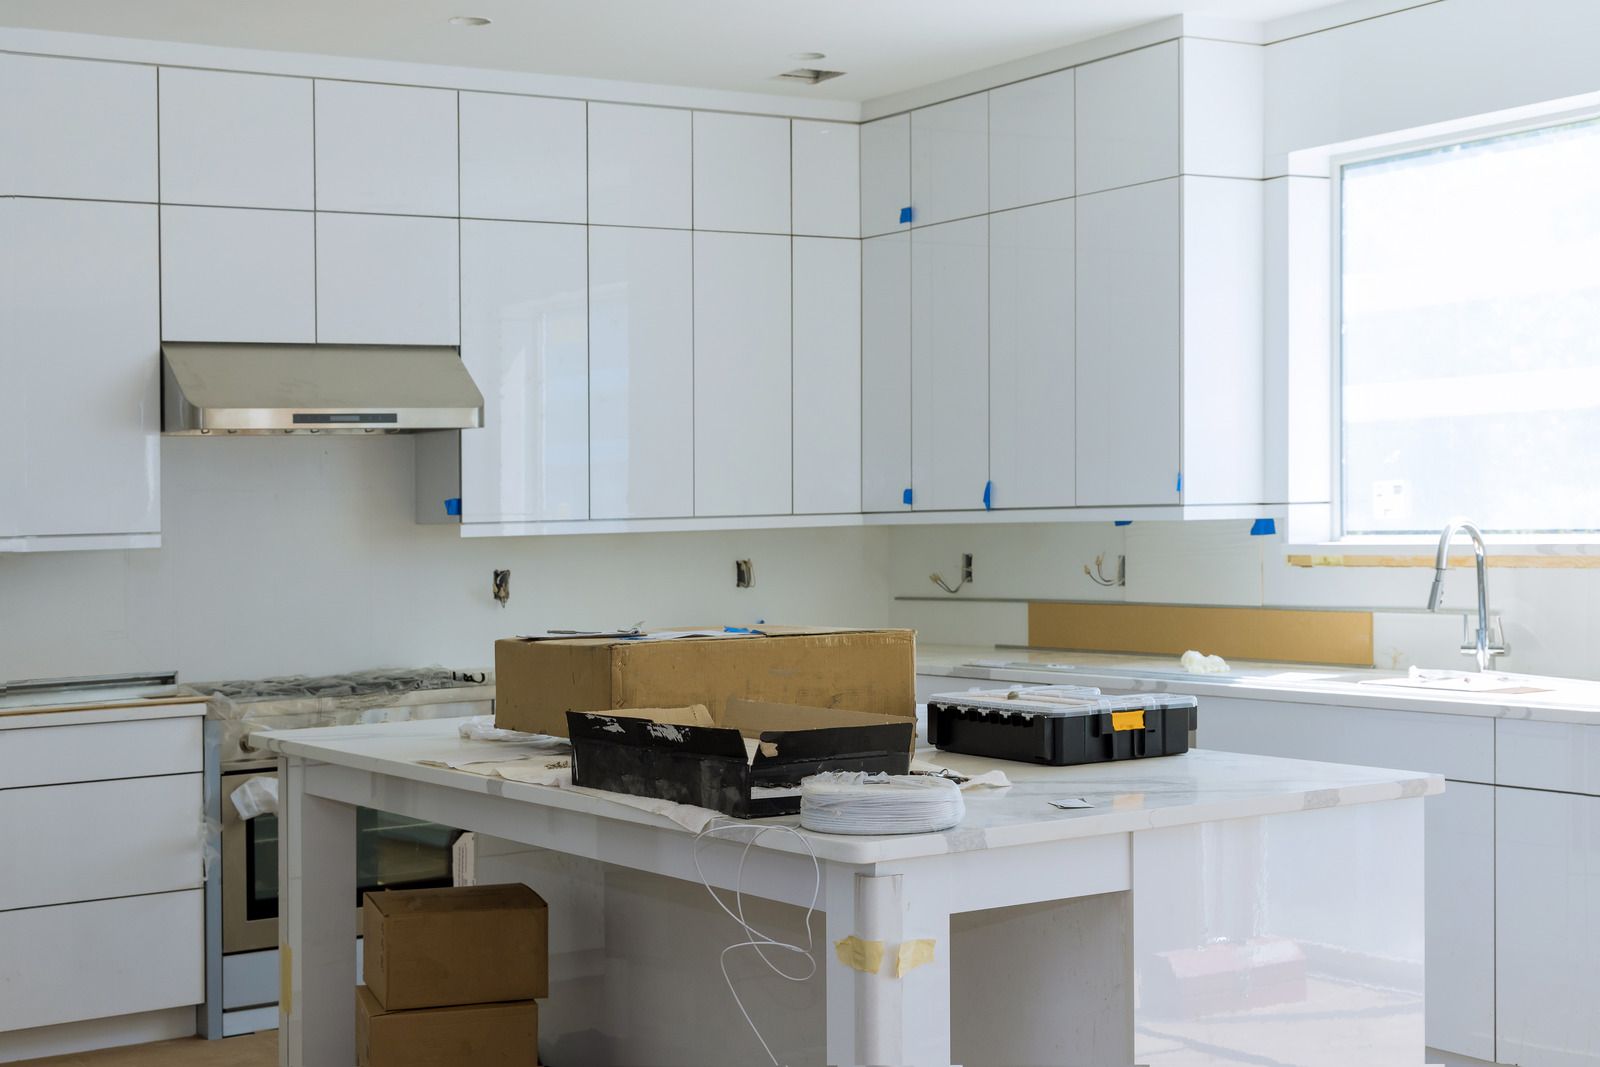 A kitchen under construction with white cabinets and a large island.